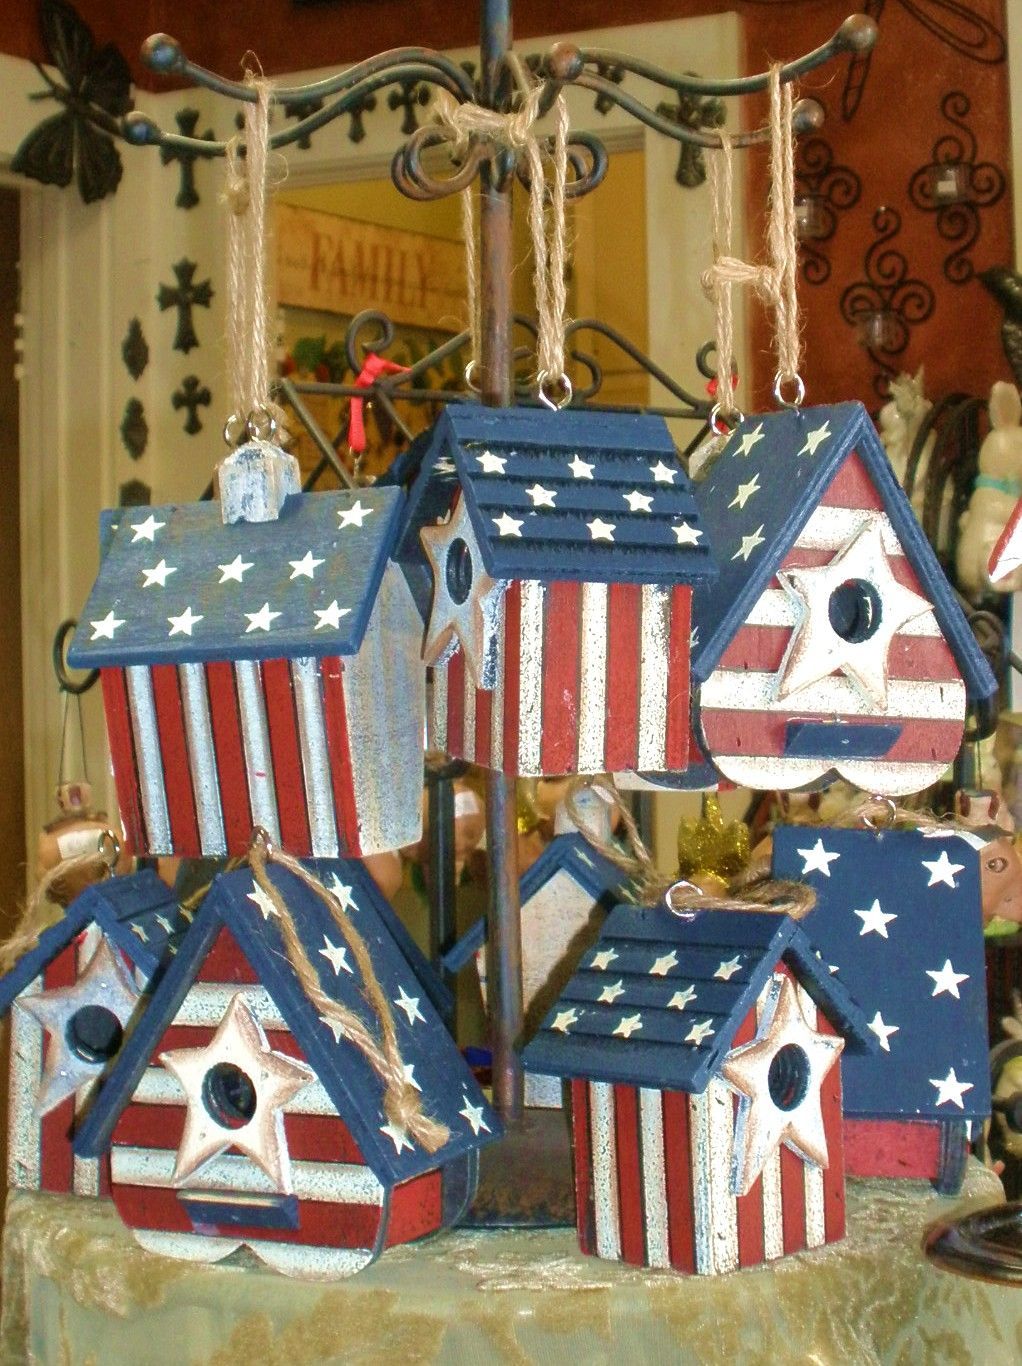 Patriotic Decorations | Decorating with a Patriotic Flair | Dragonfly Shops & Gardens